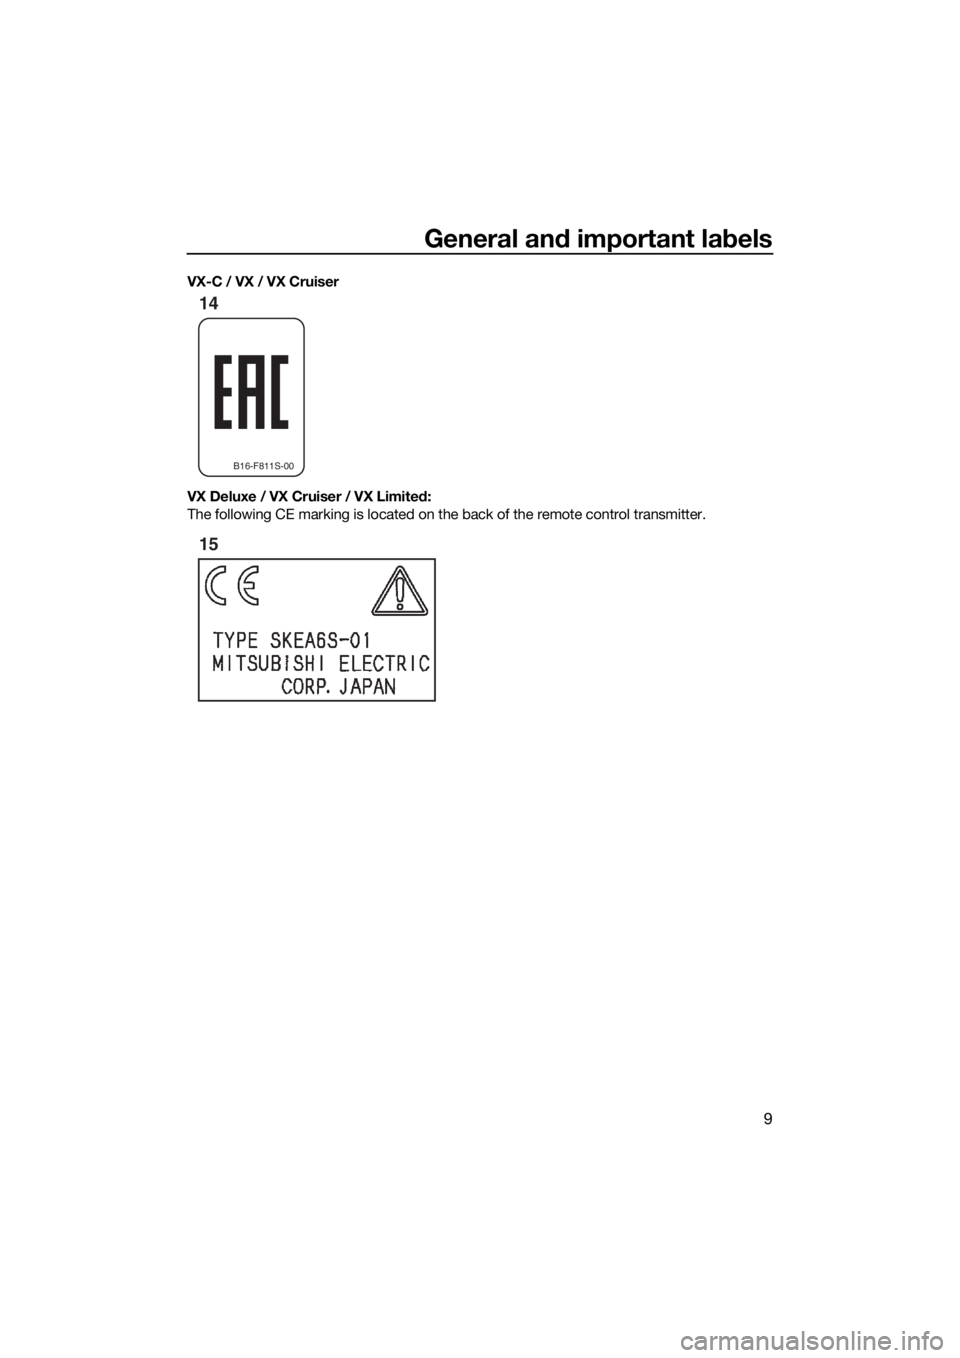 YAMAHA VX LIMITED 2019 User Guide General and important labels
9
VX-C / VX / VX Cruiser
VX Deluxe / VX Cruiser / VX Limited: 
The following CE marking is located on the back of the remote control transmitter.
B16-F811S-00
14
15
UF4G73